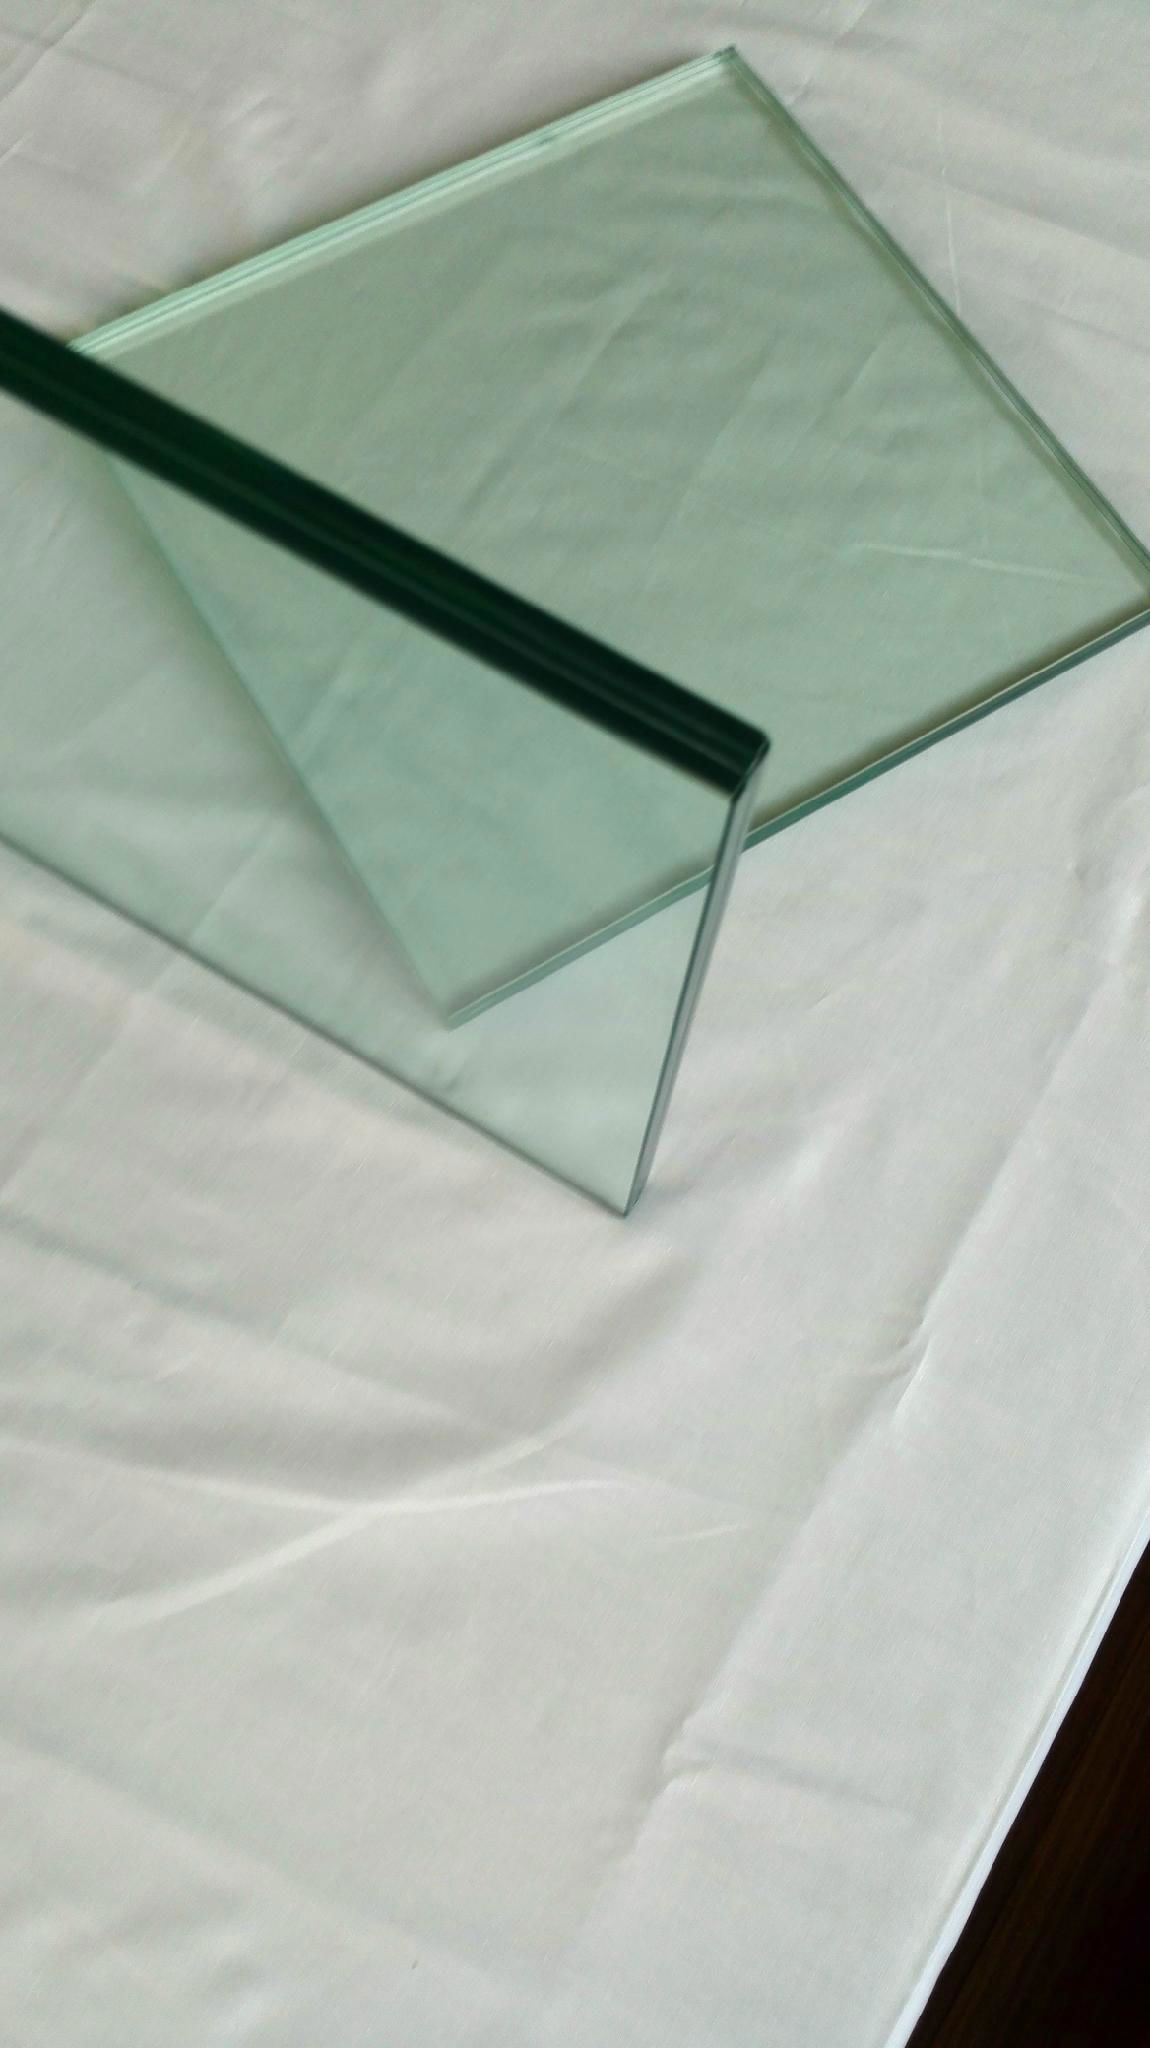 SGP TEMPERED LAMINATED GLASS 4